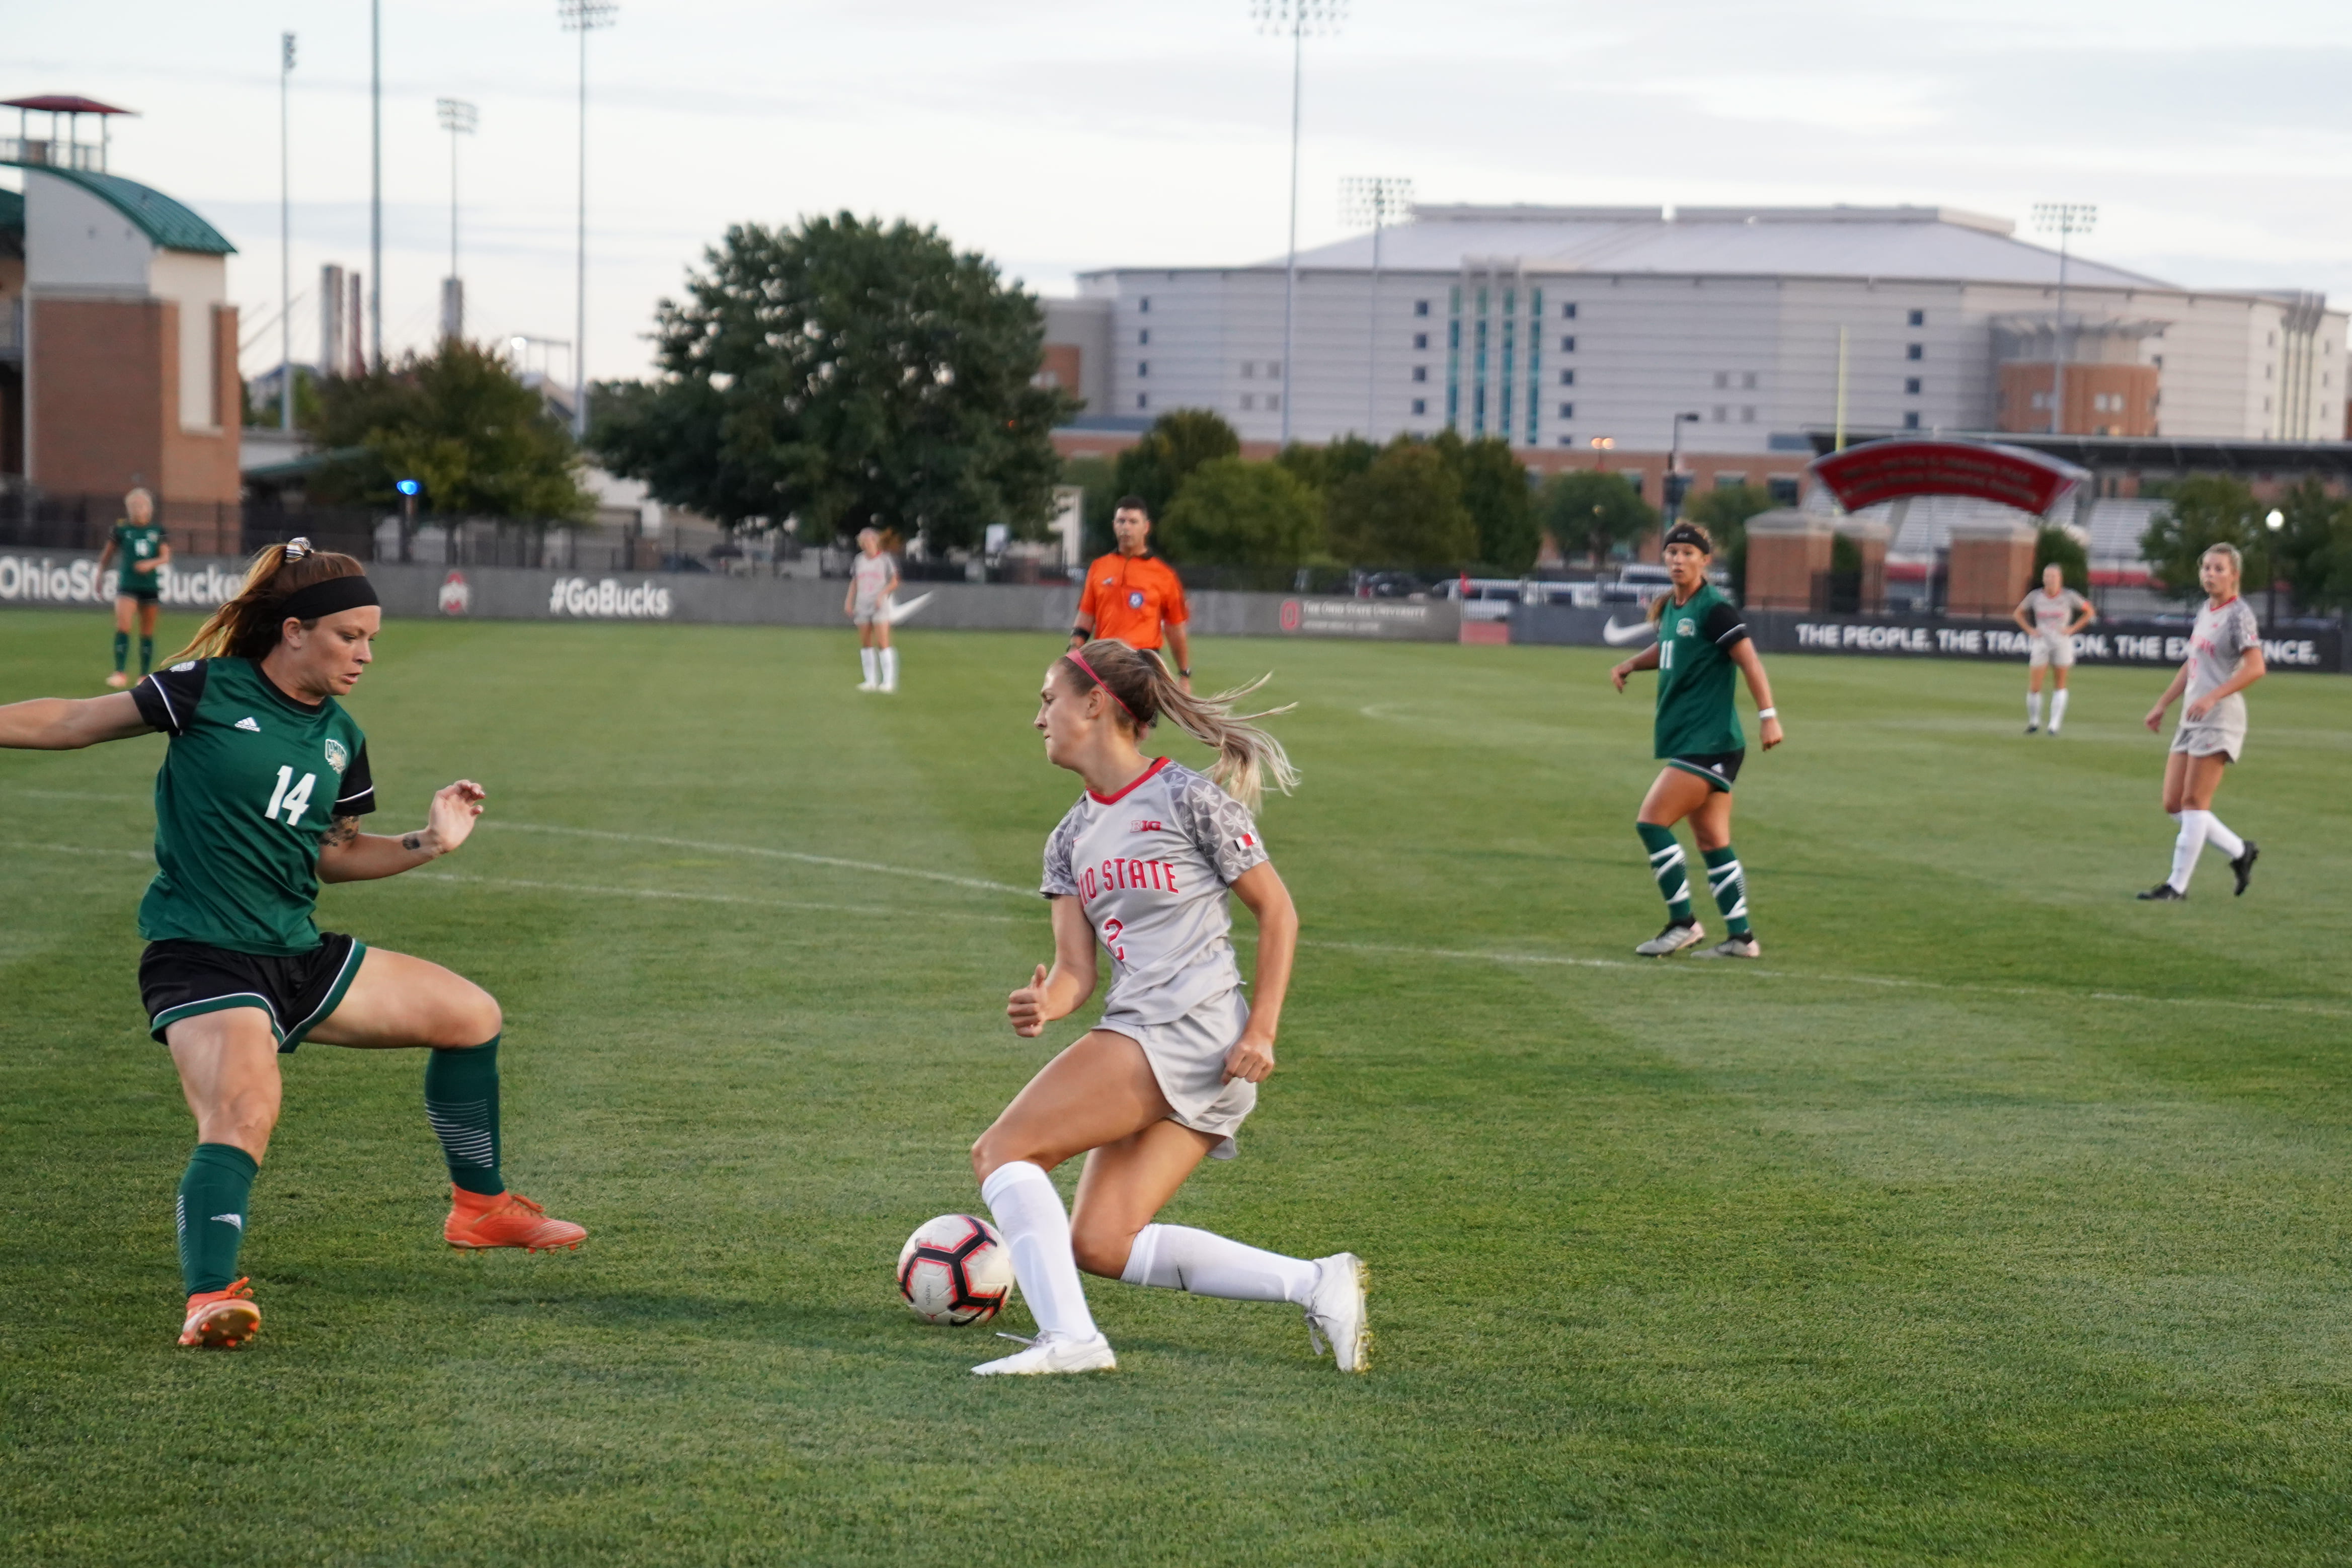 Women’s soccer: Ohio State and Penn State tie 2-2 in double overtime